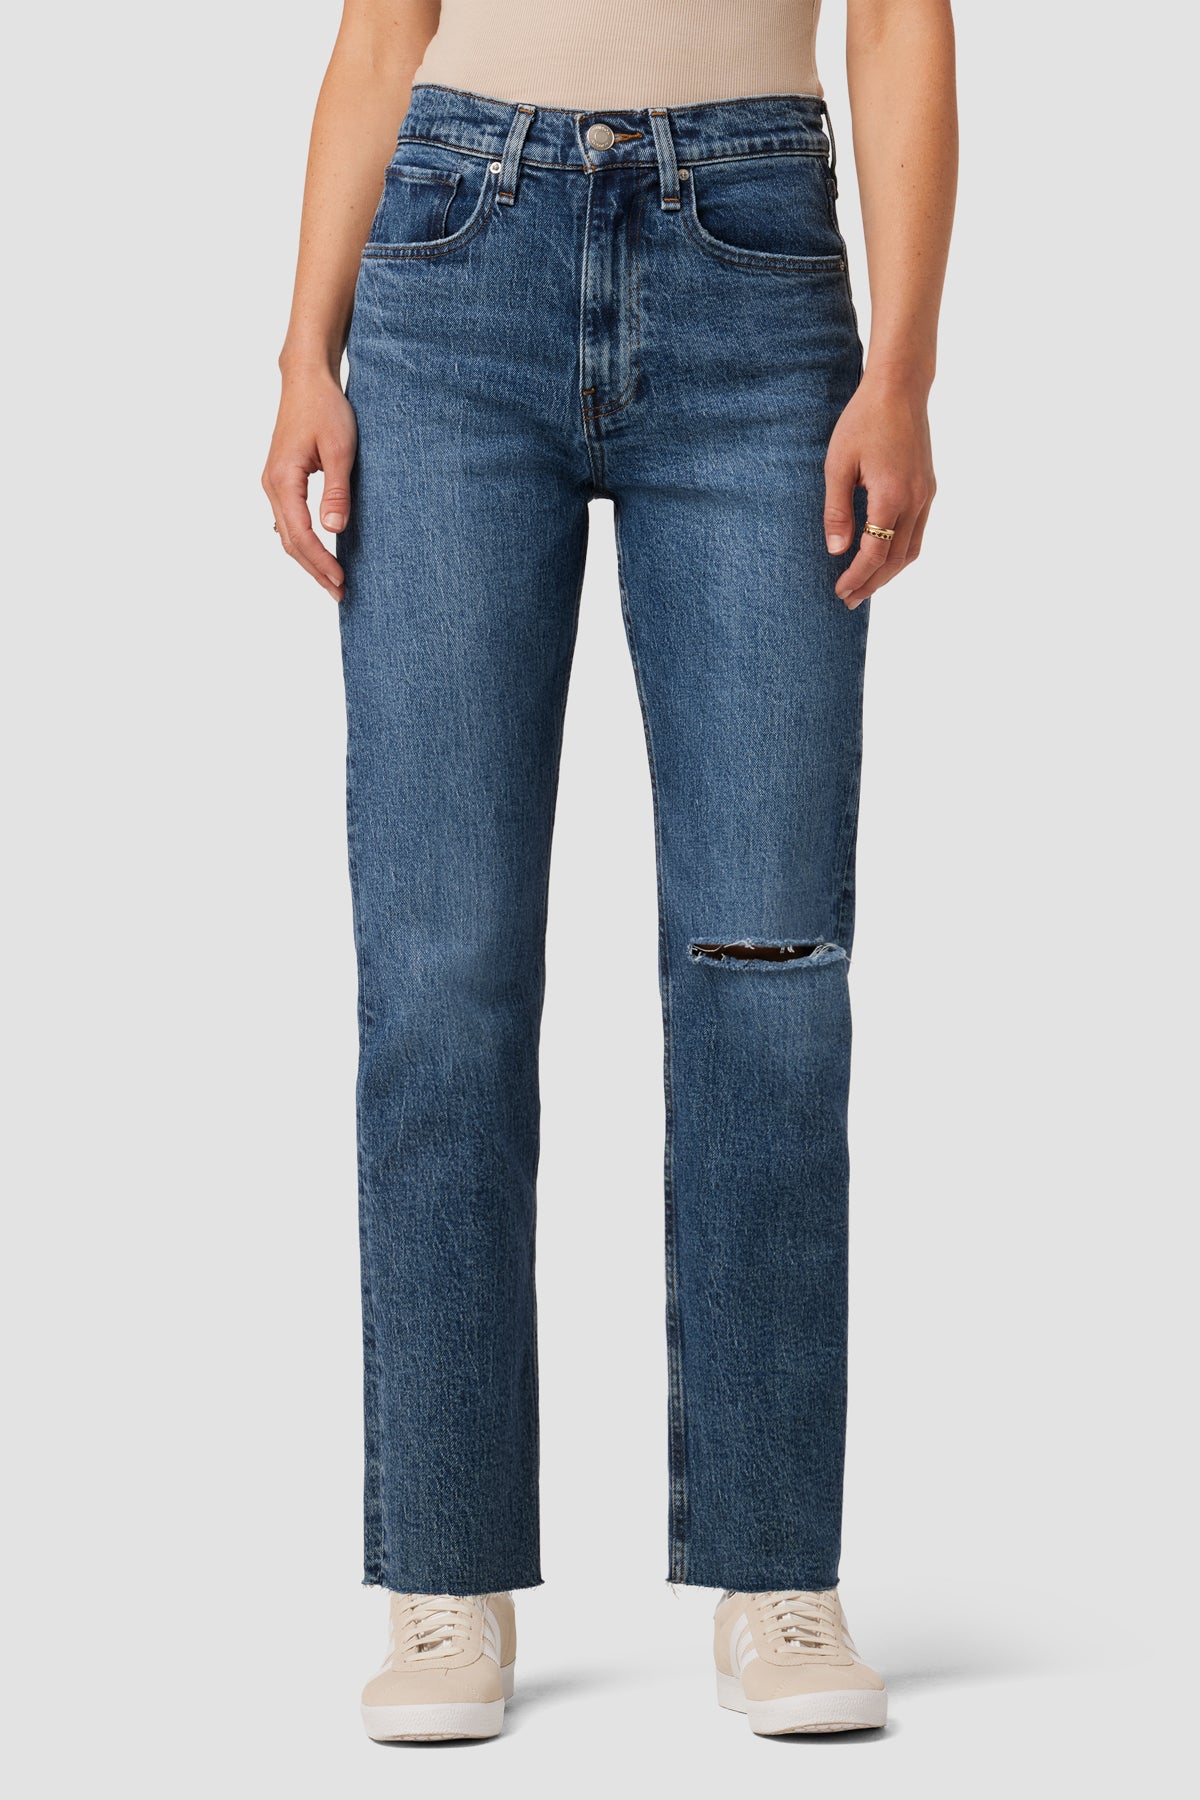 We are proud treat every customer who to the store as they were family. Helping customers locate Jade High-Rise Straight Loose Fit Jean Hudson Jeans is our goal